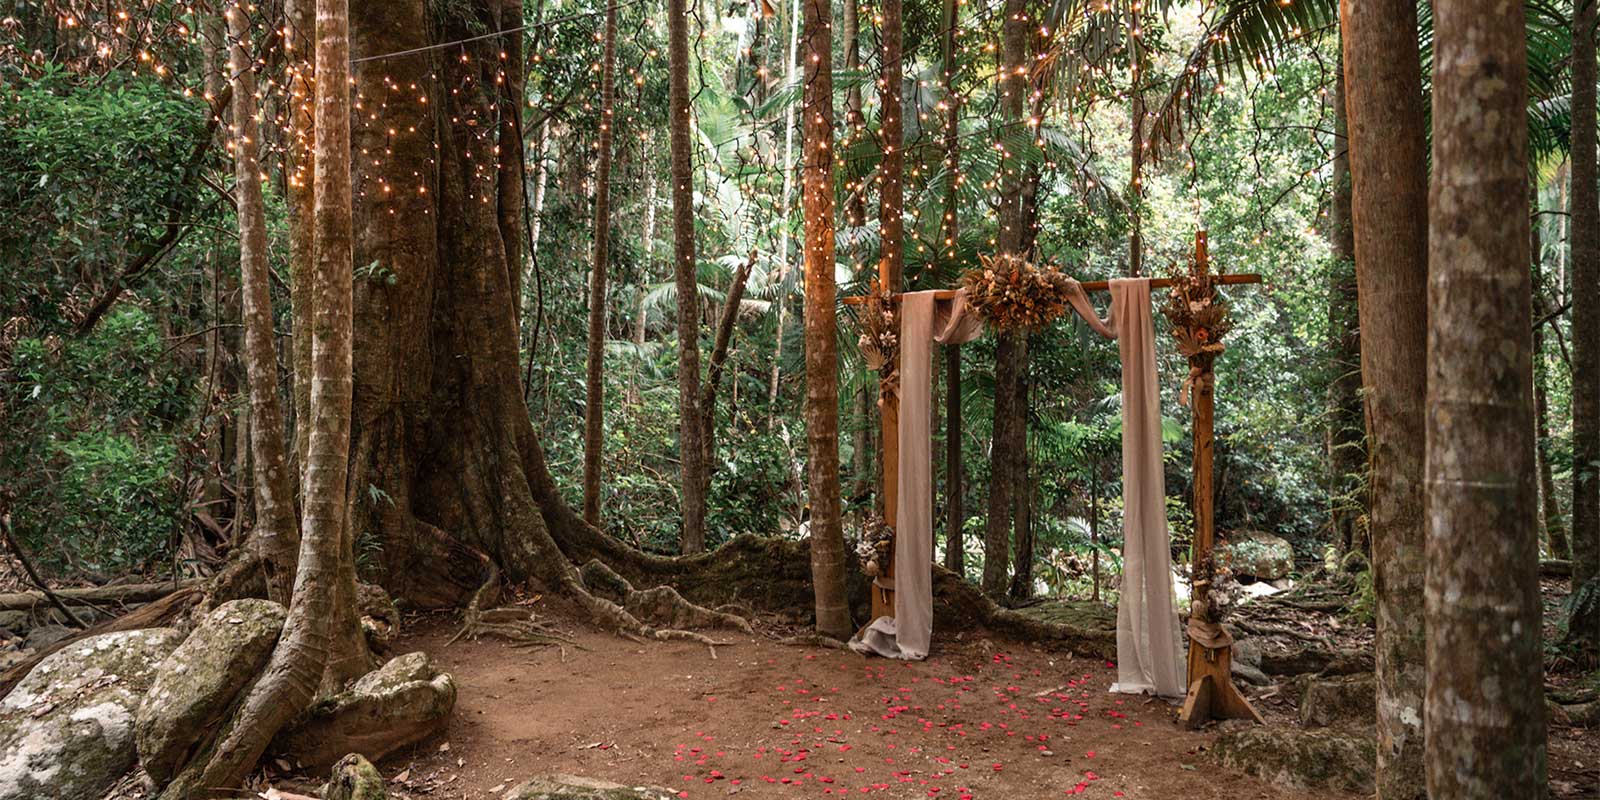 Our ancient fig tree is the perfect backdrop for an intimate wedding at Crystal Creek Rainforest Retreat